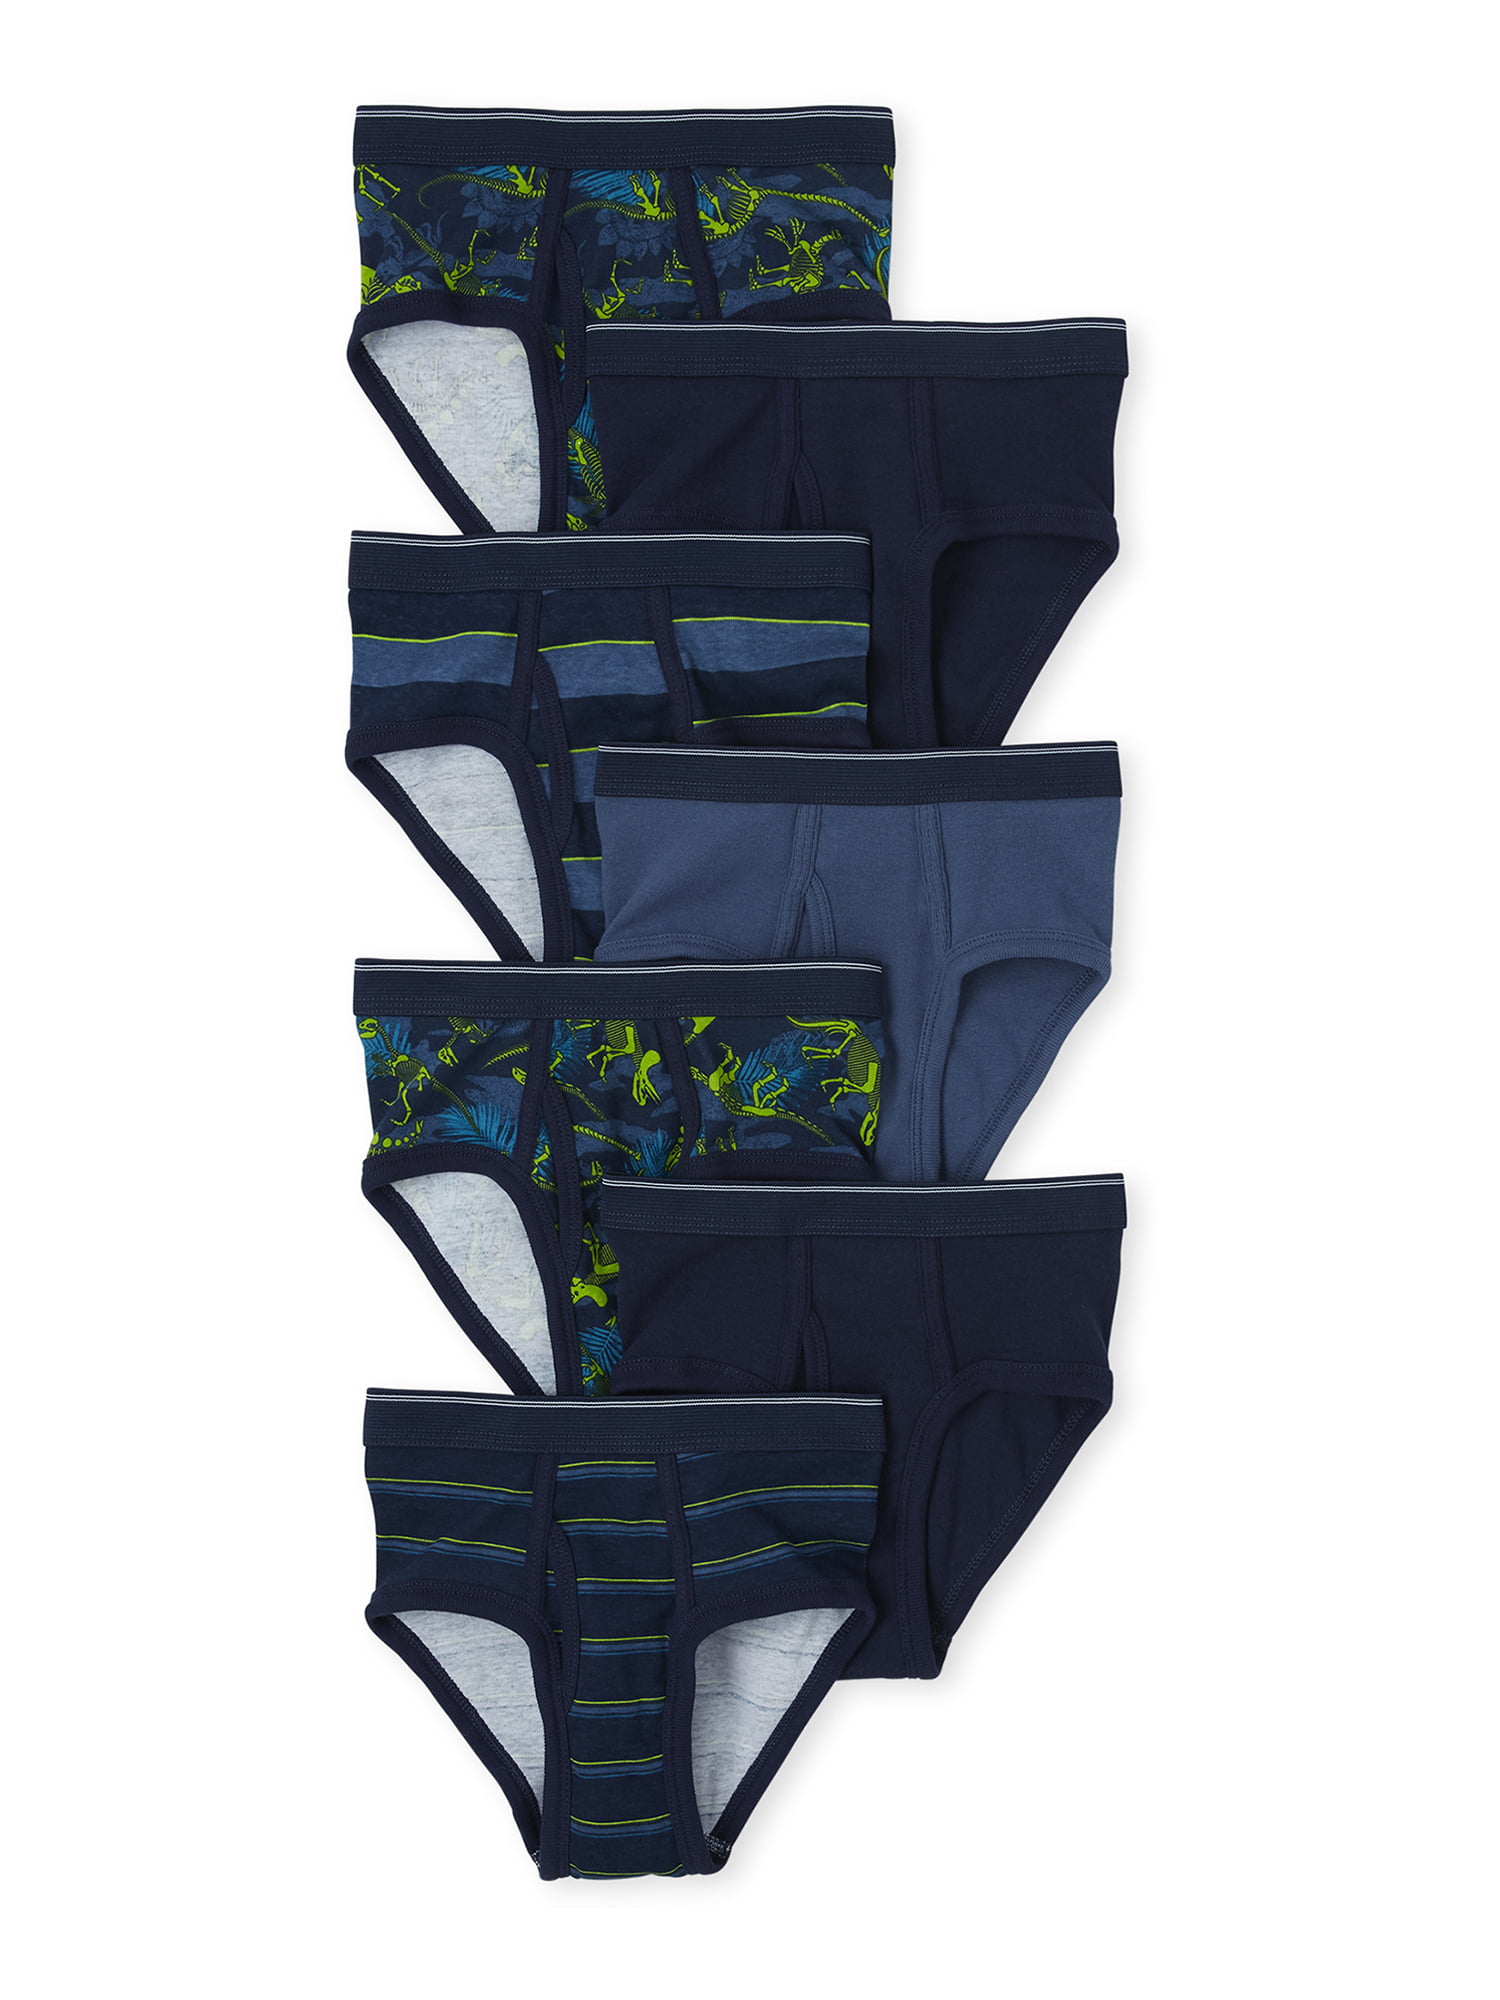 The Childrens Place Big Boys 7 Pack Novelty Printed Brief Set